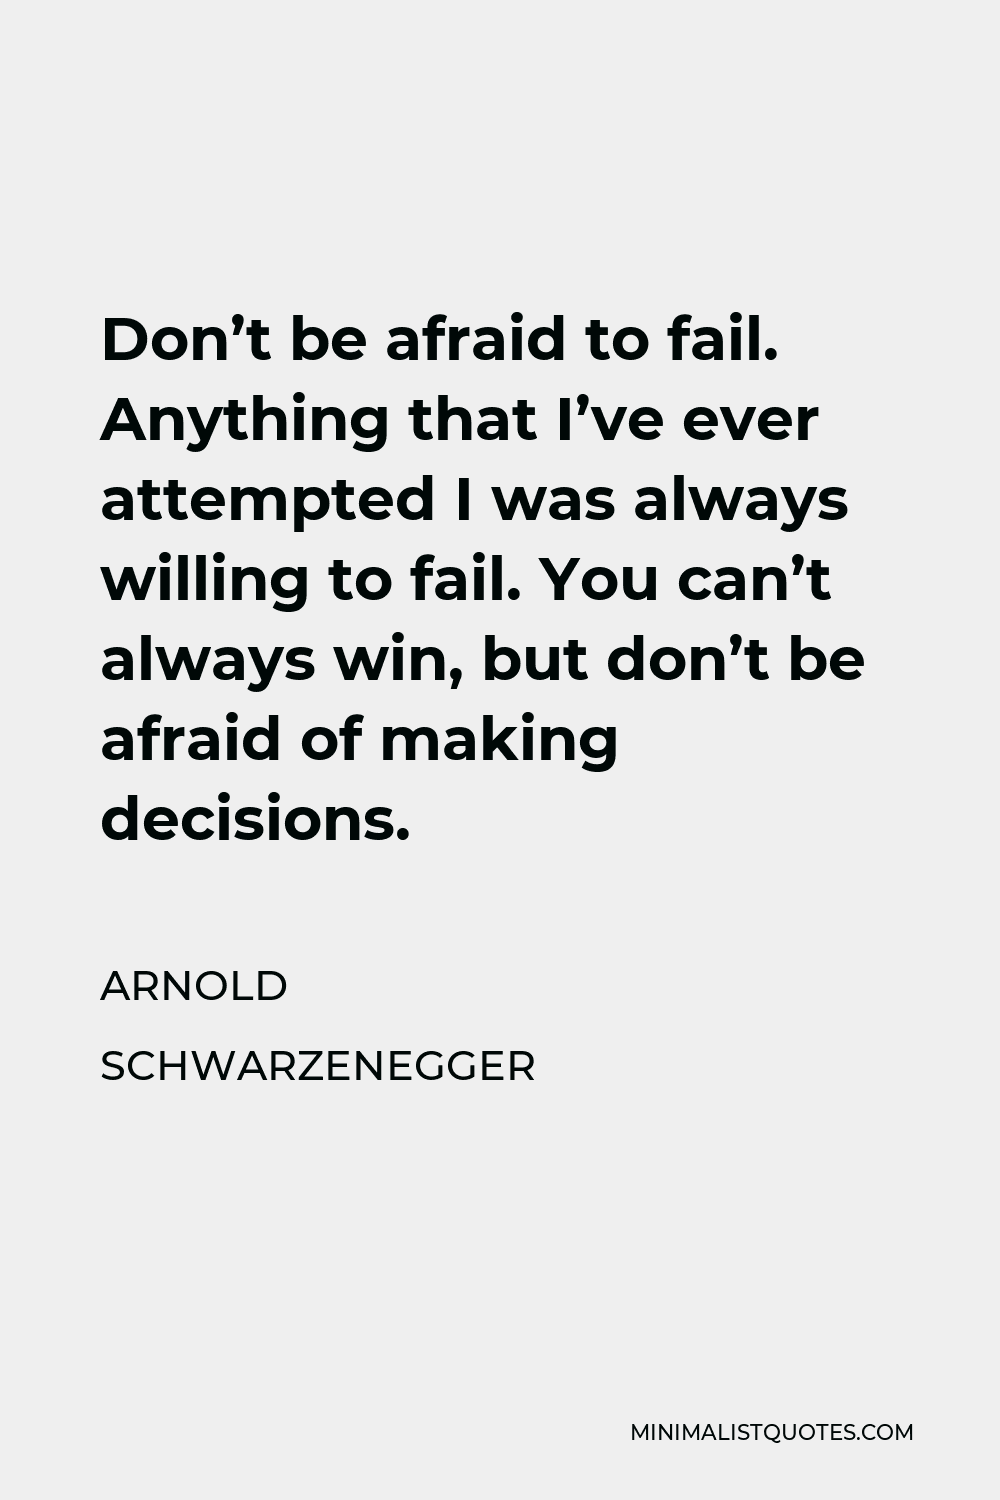 Arnold Schwarzenegger Quote - Don’t be afraid to fail. Anything that I’ve ever attempted I was always willing to fail. You can’t always win, but don’t be afraid of making decisions.